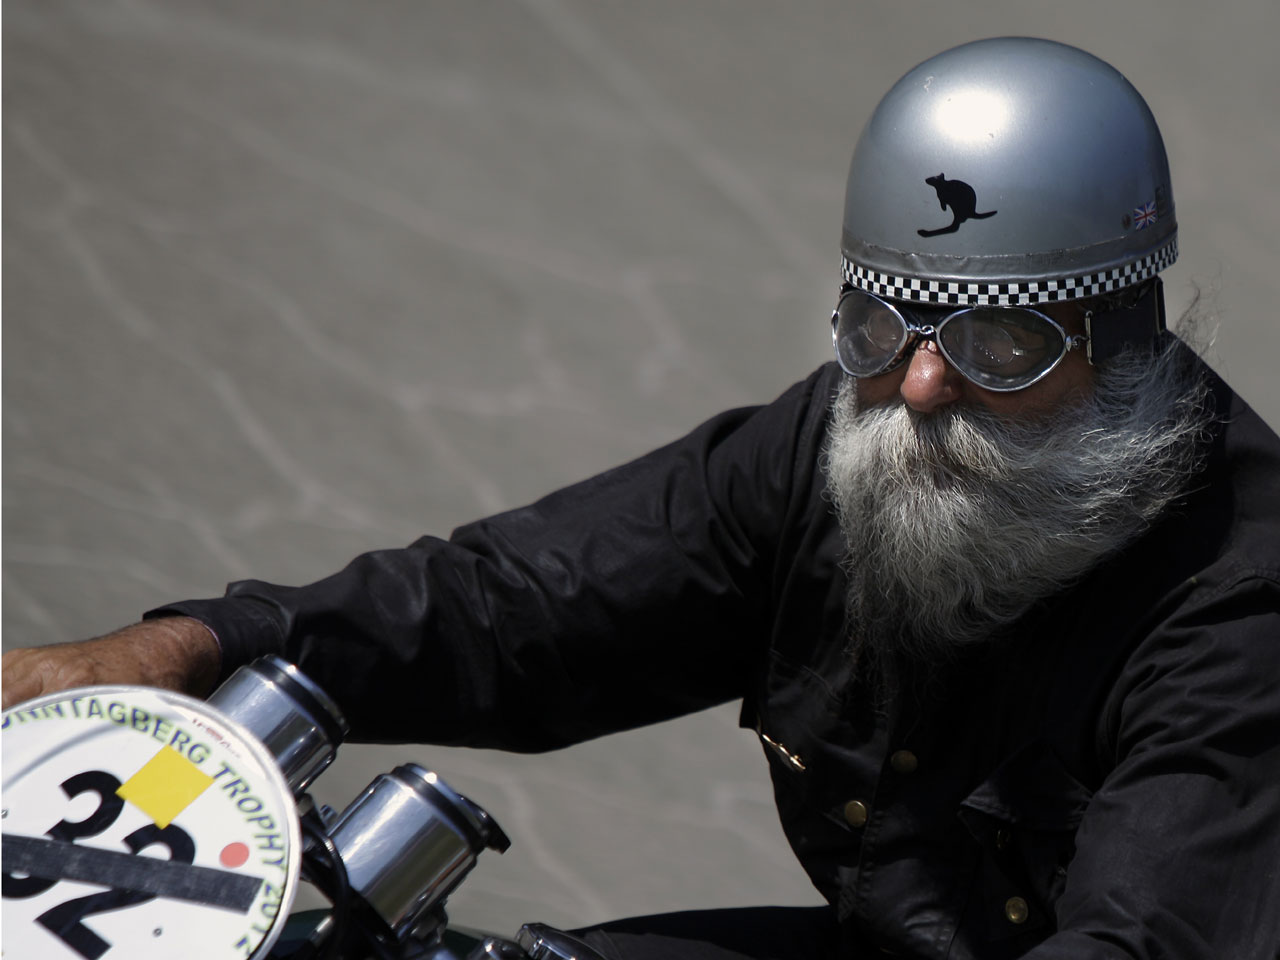 An old motorcyclist riding with helmet on a road